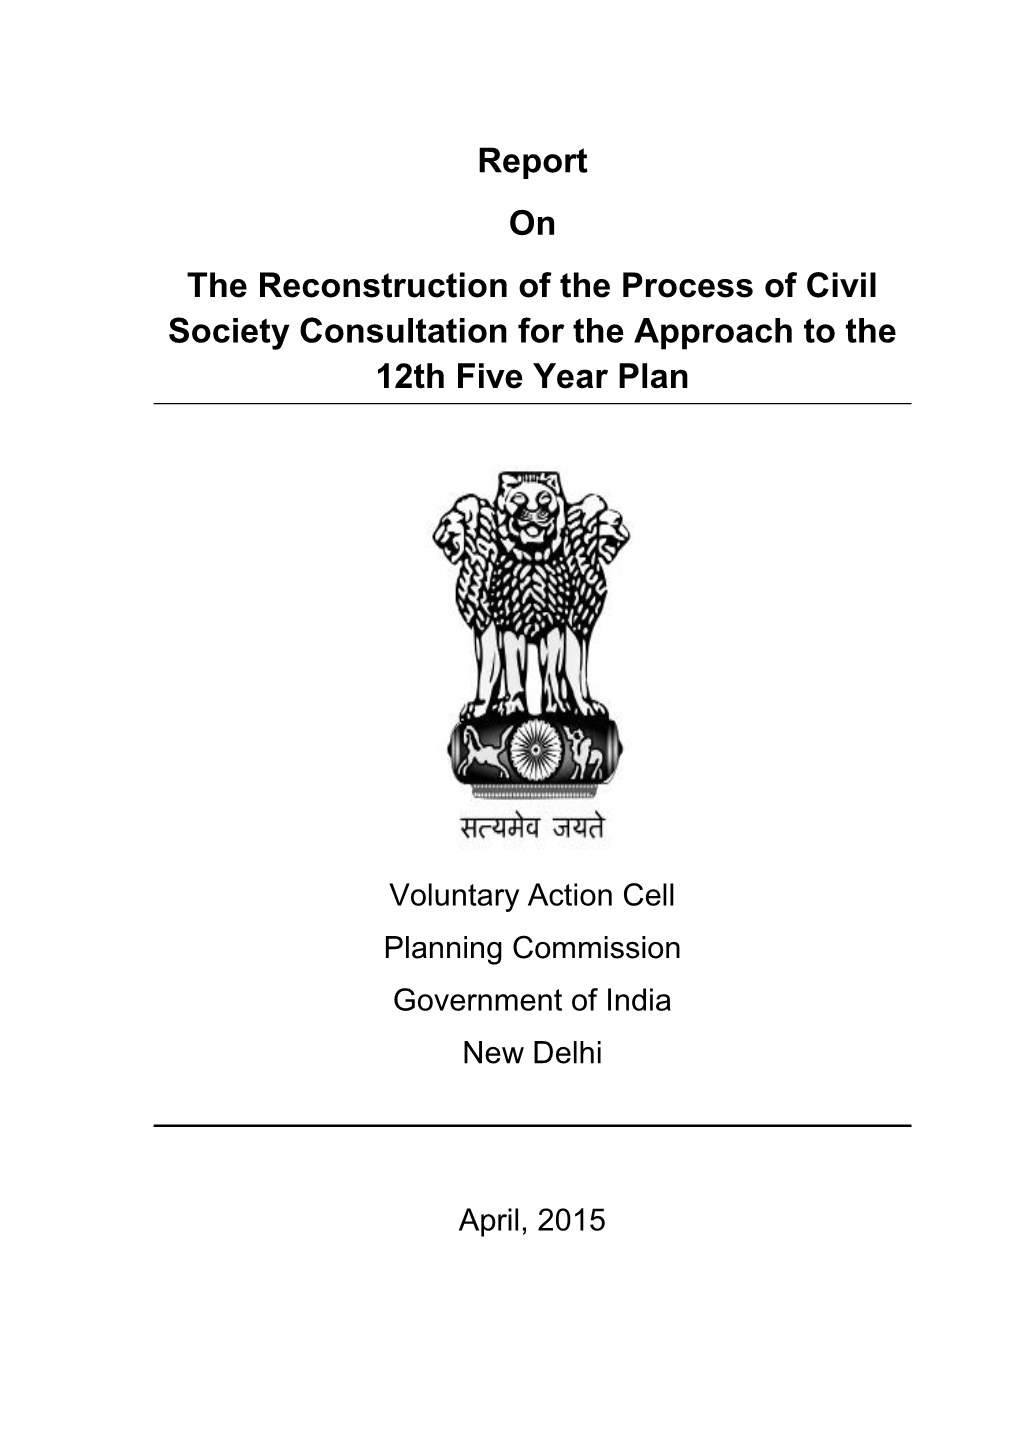 Report on the Reconstruction of the Process of Civil Society Consultation for the Approach to the 12Th Five Year Plan